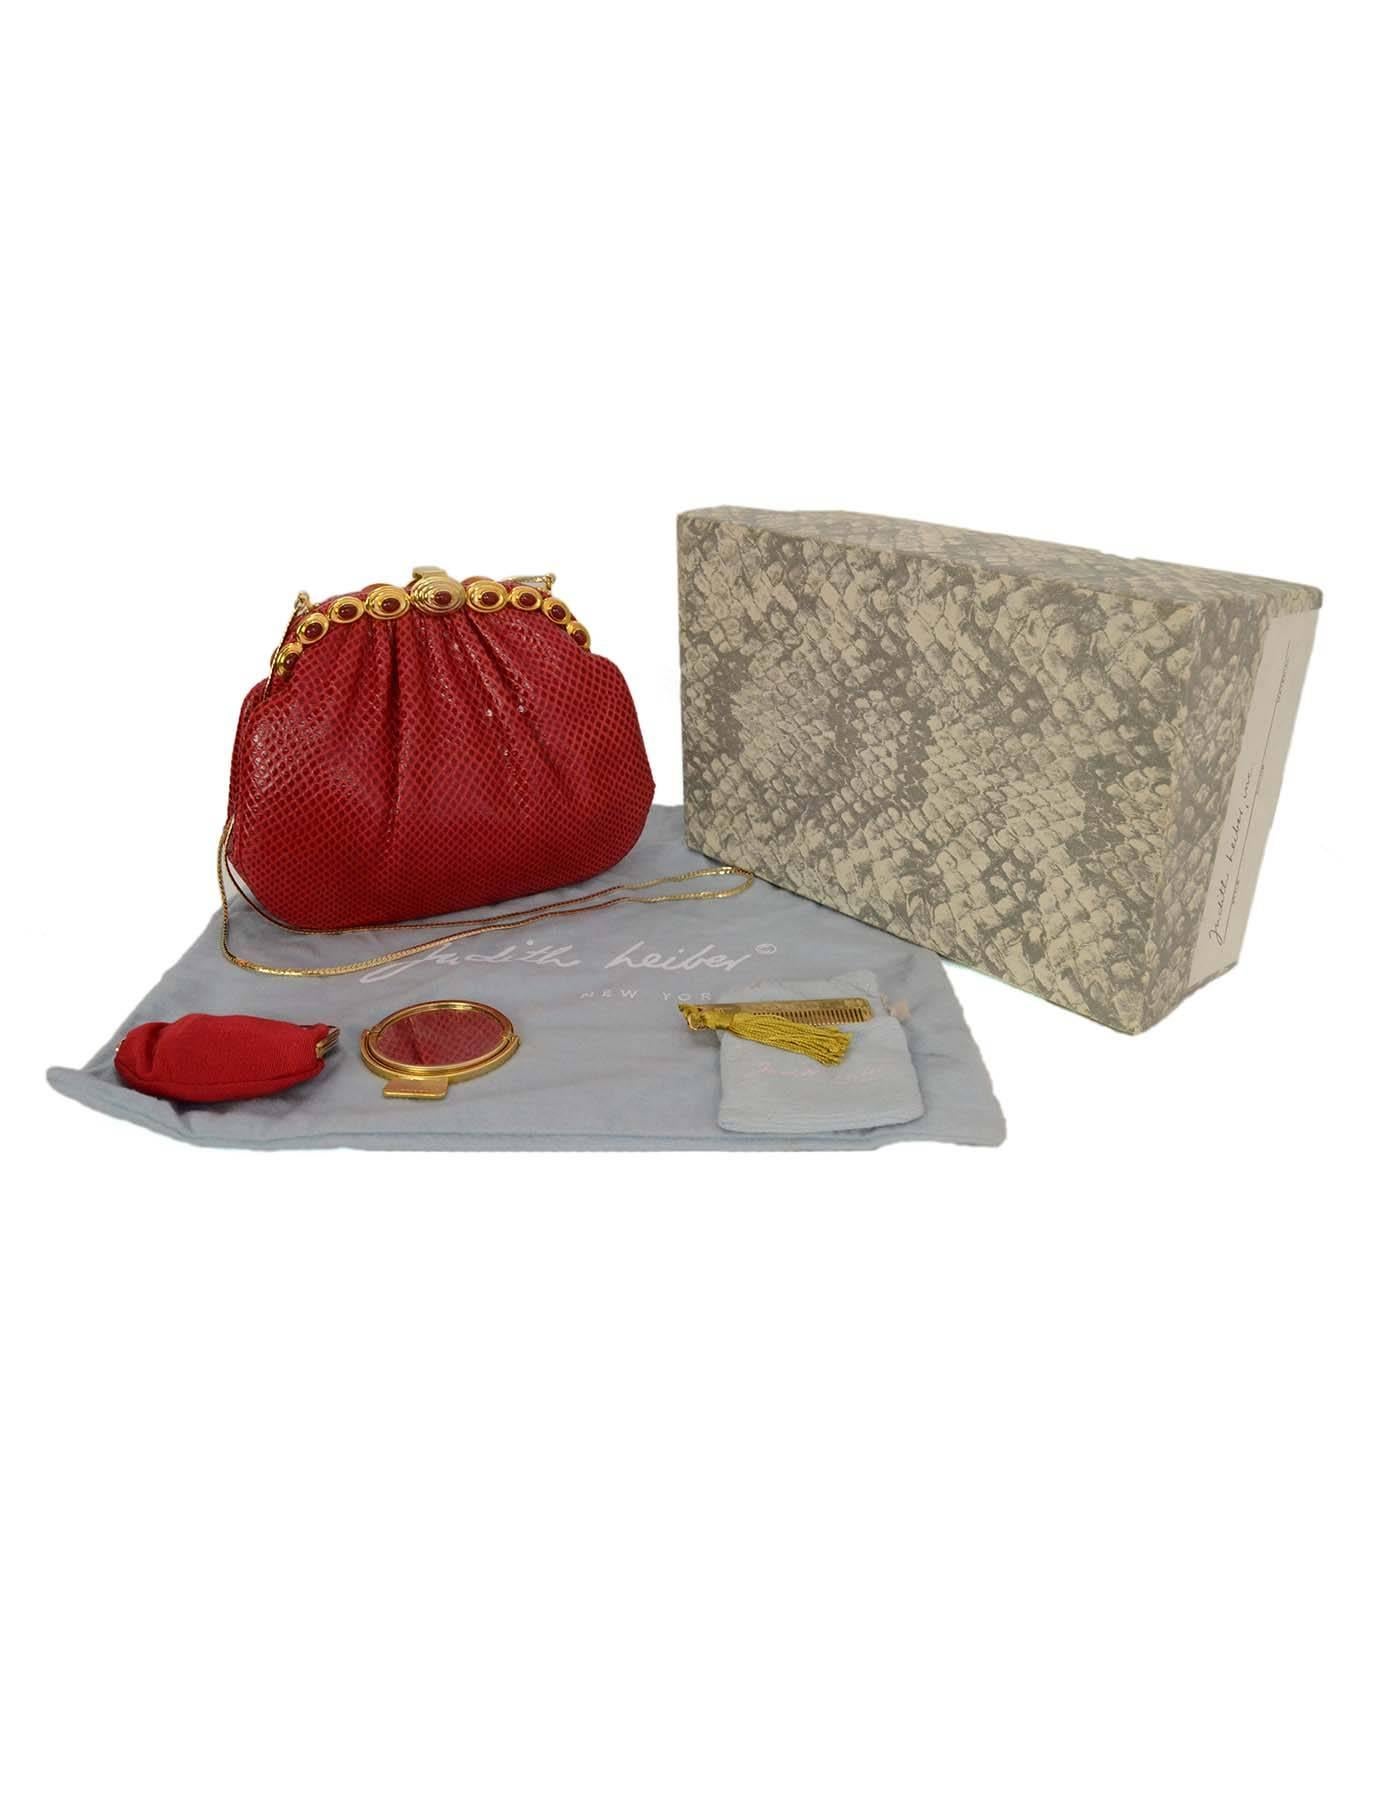 Judith Leiber Red Karung Snakeskin Clutch with GHW 5